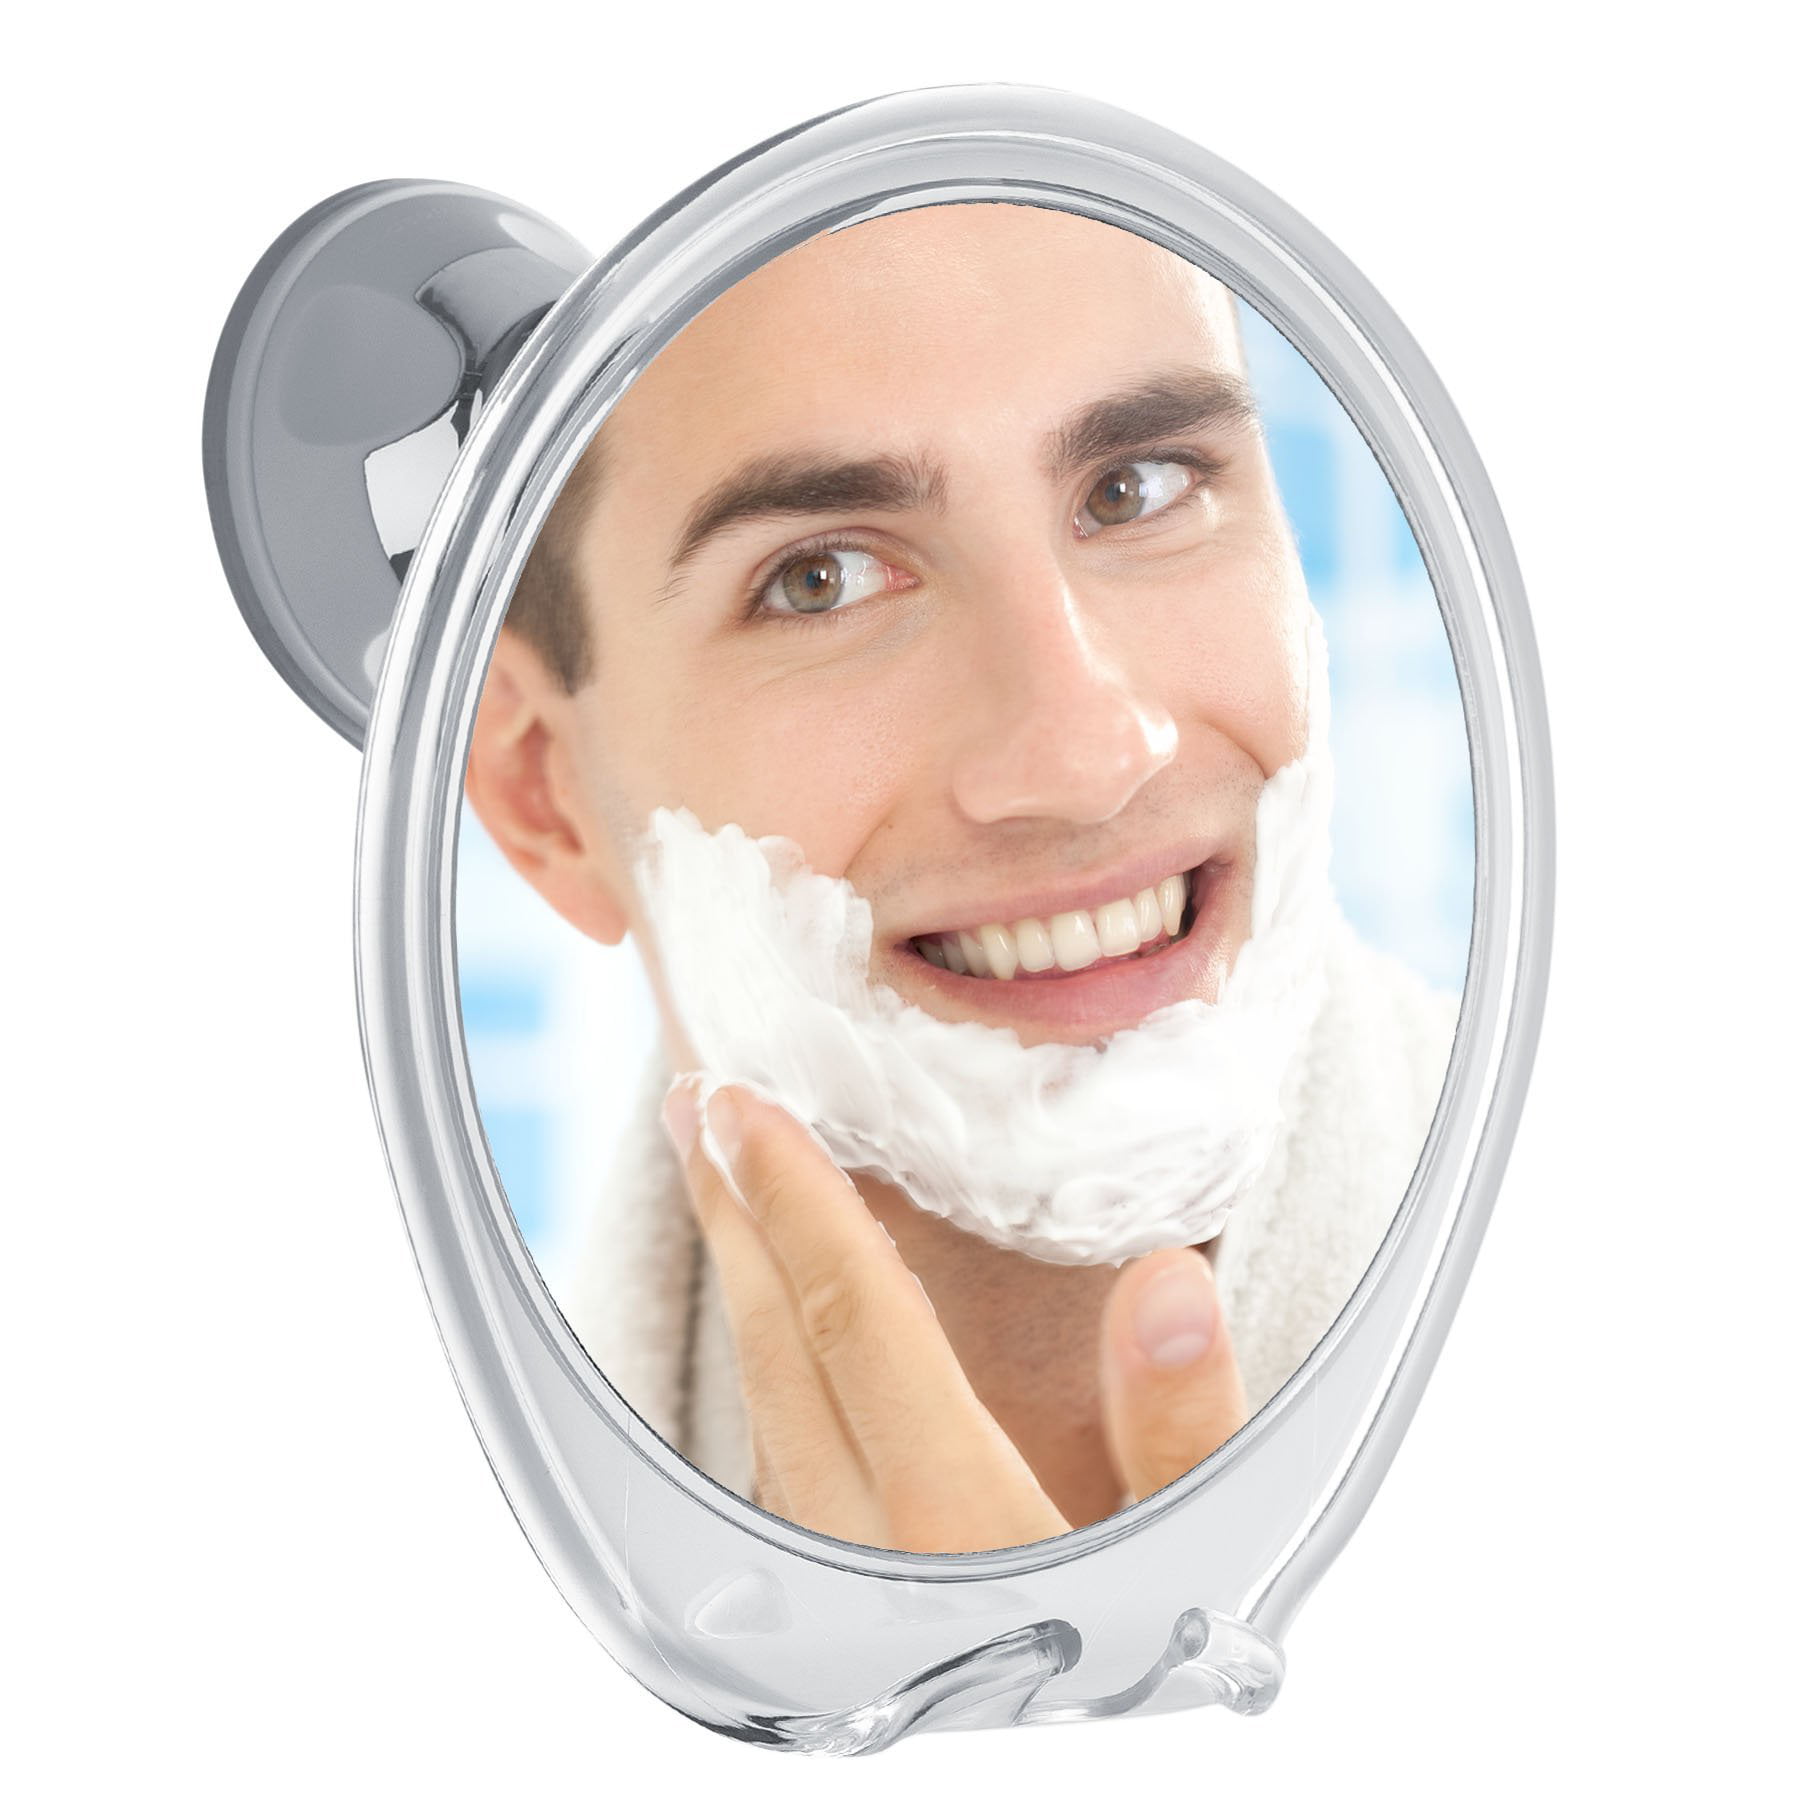 TOUCHBeauty Shower Mirrors for Men, 3X Magnification Shaving Mirror with  Razor Holder, 360degree Swivel Bathroom Accessories for Men & Women 11  Size